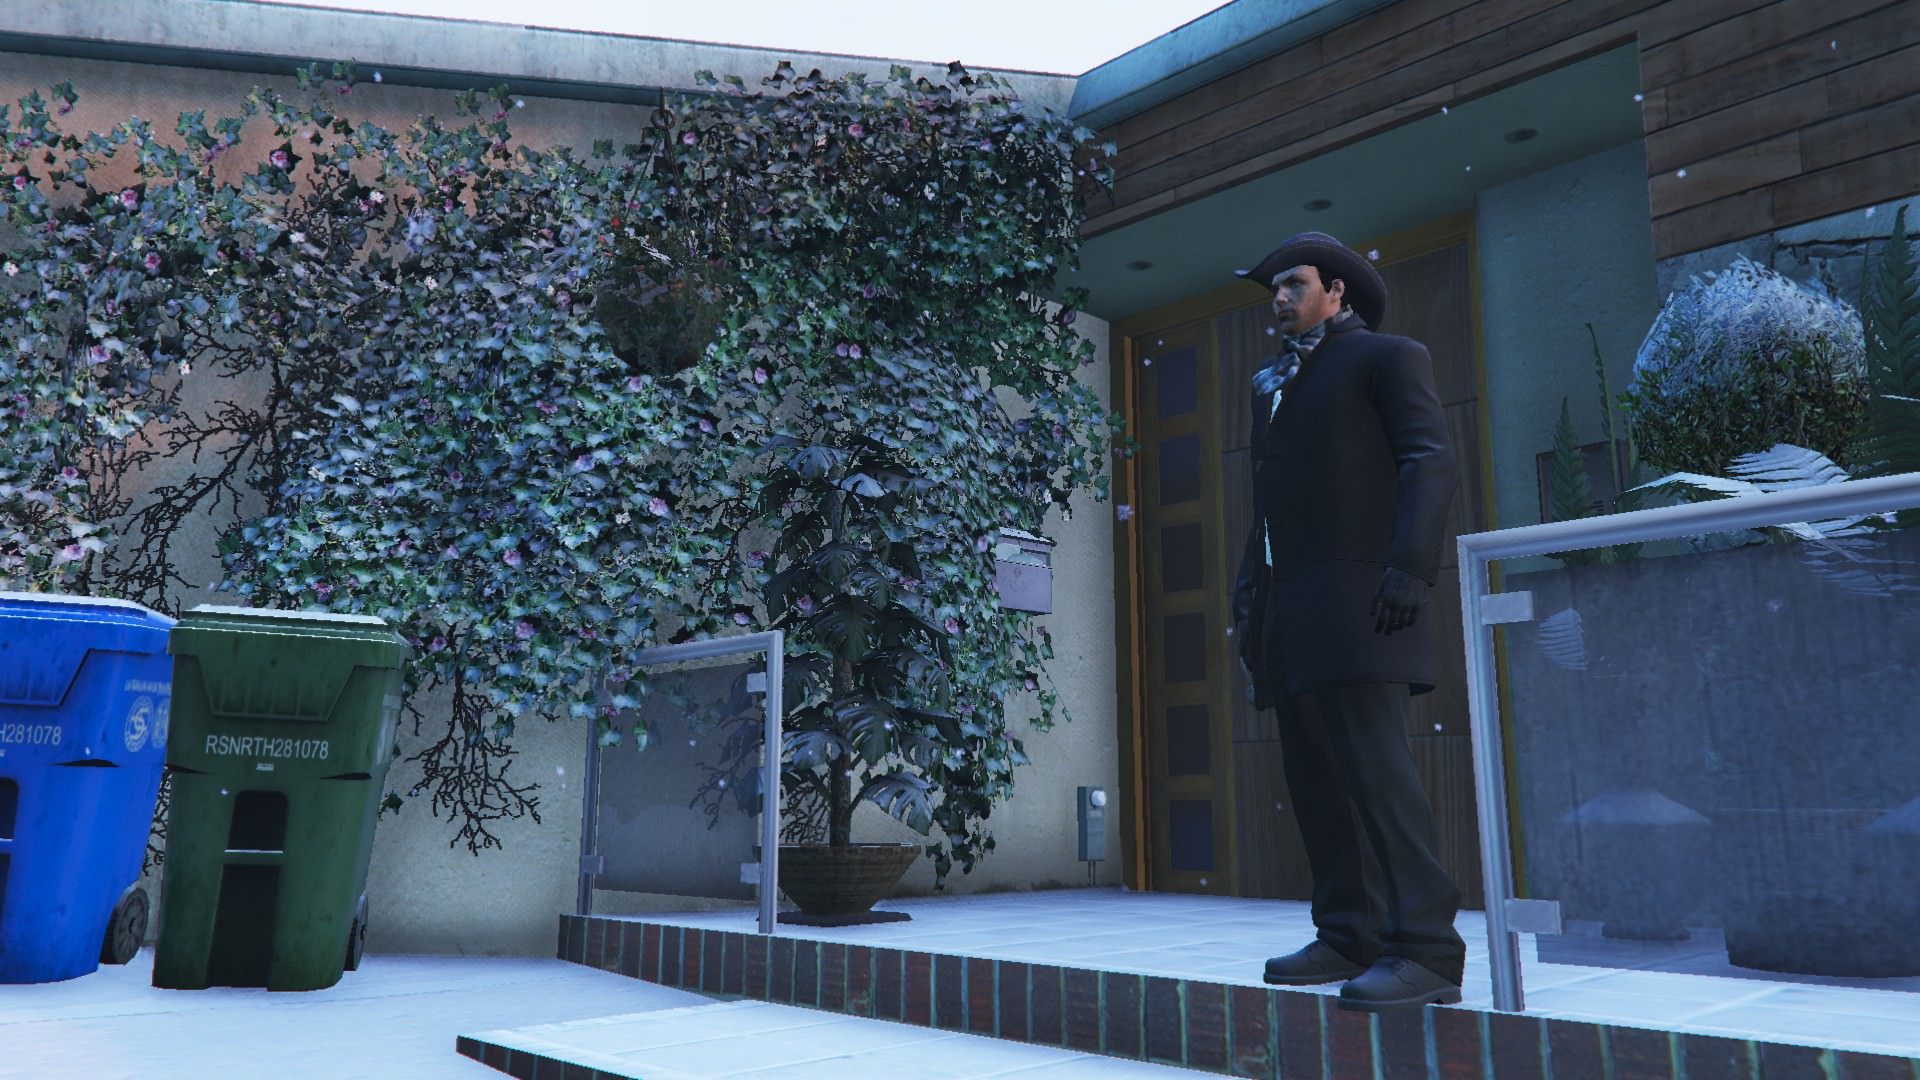 Visiting fellow co-worker Franklin on an icy Los Santos day 1